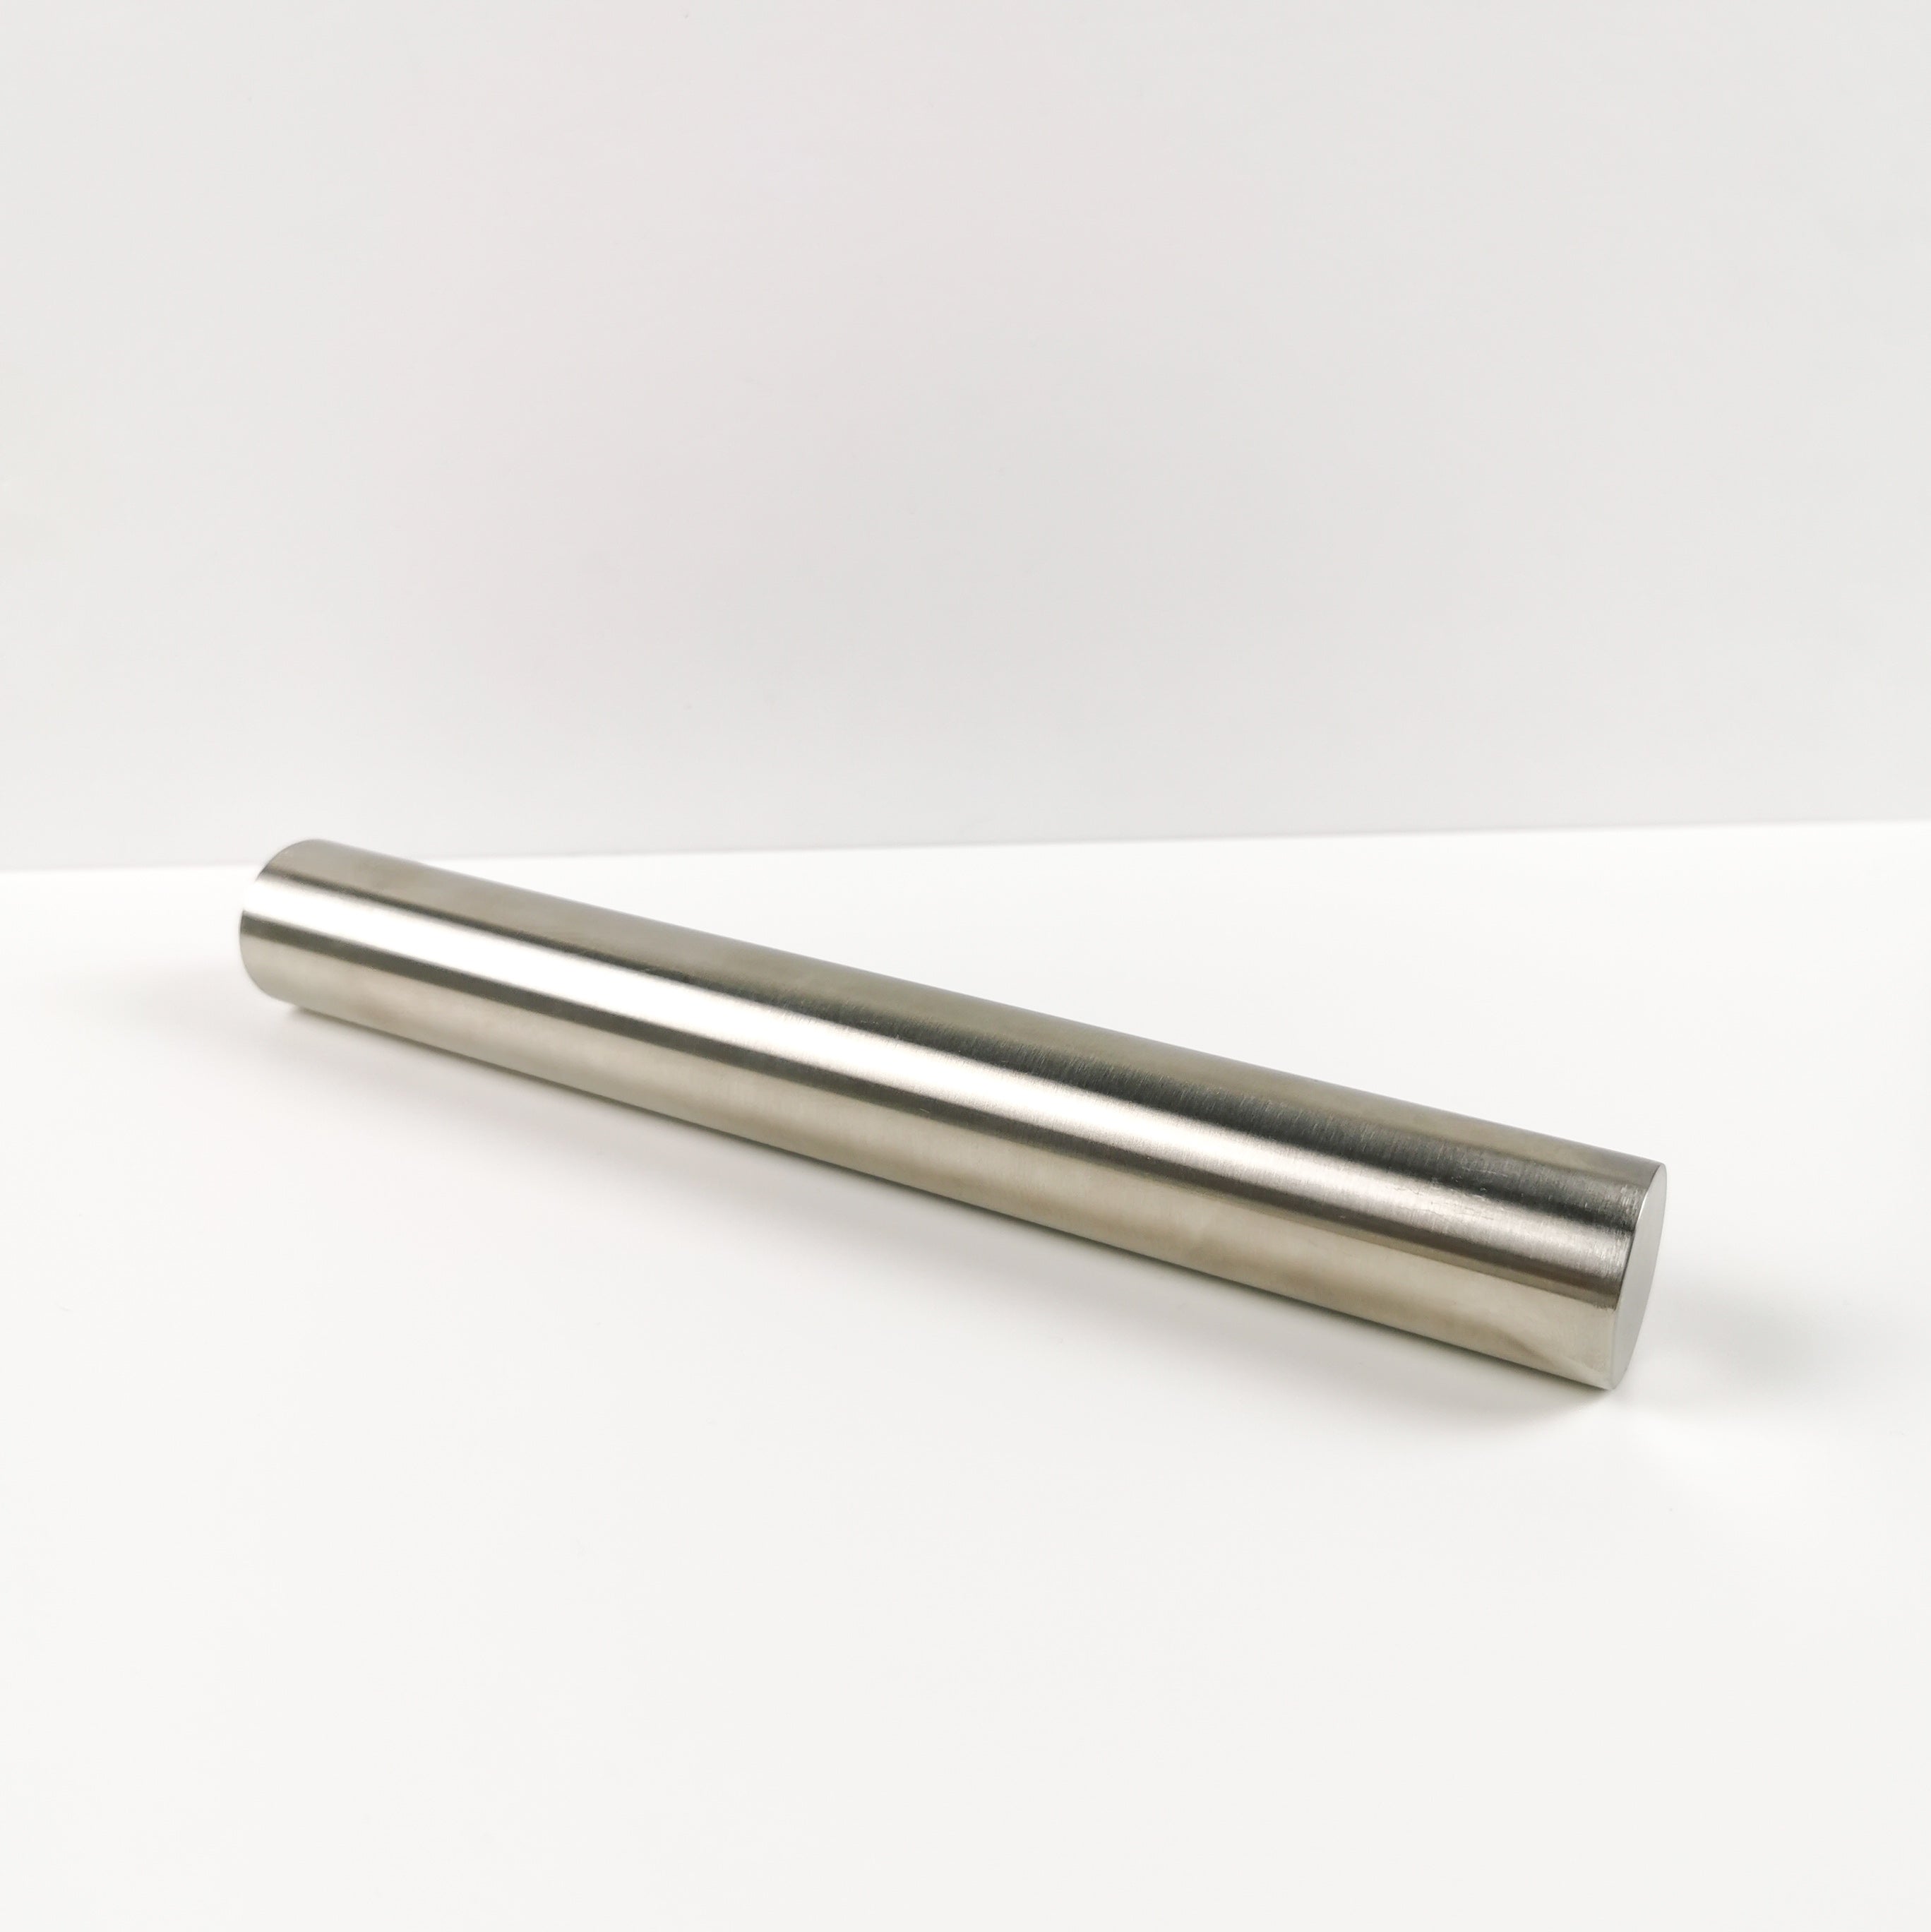 Stainless Steel Non-Stick Roller